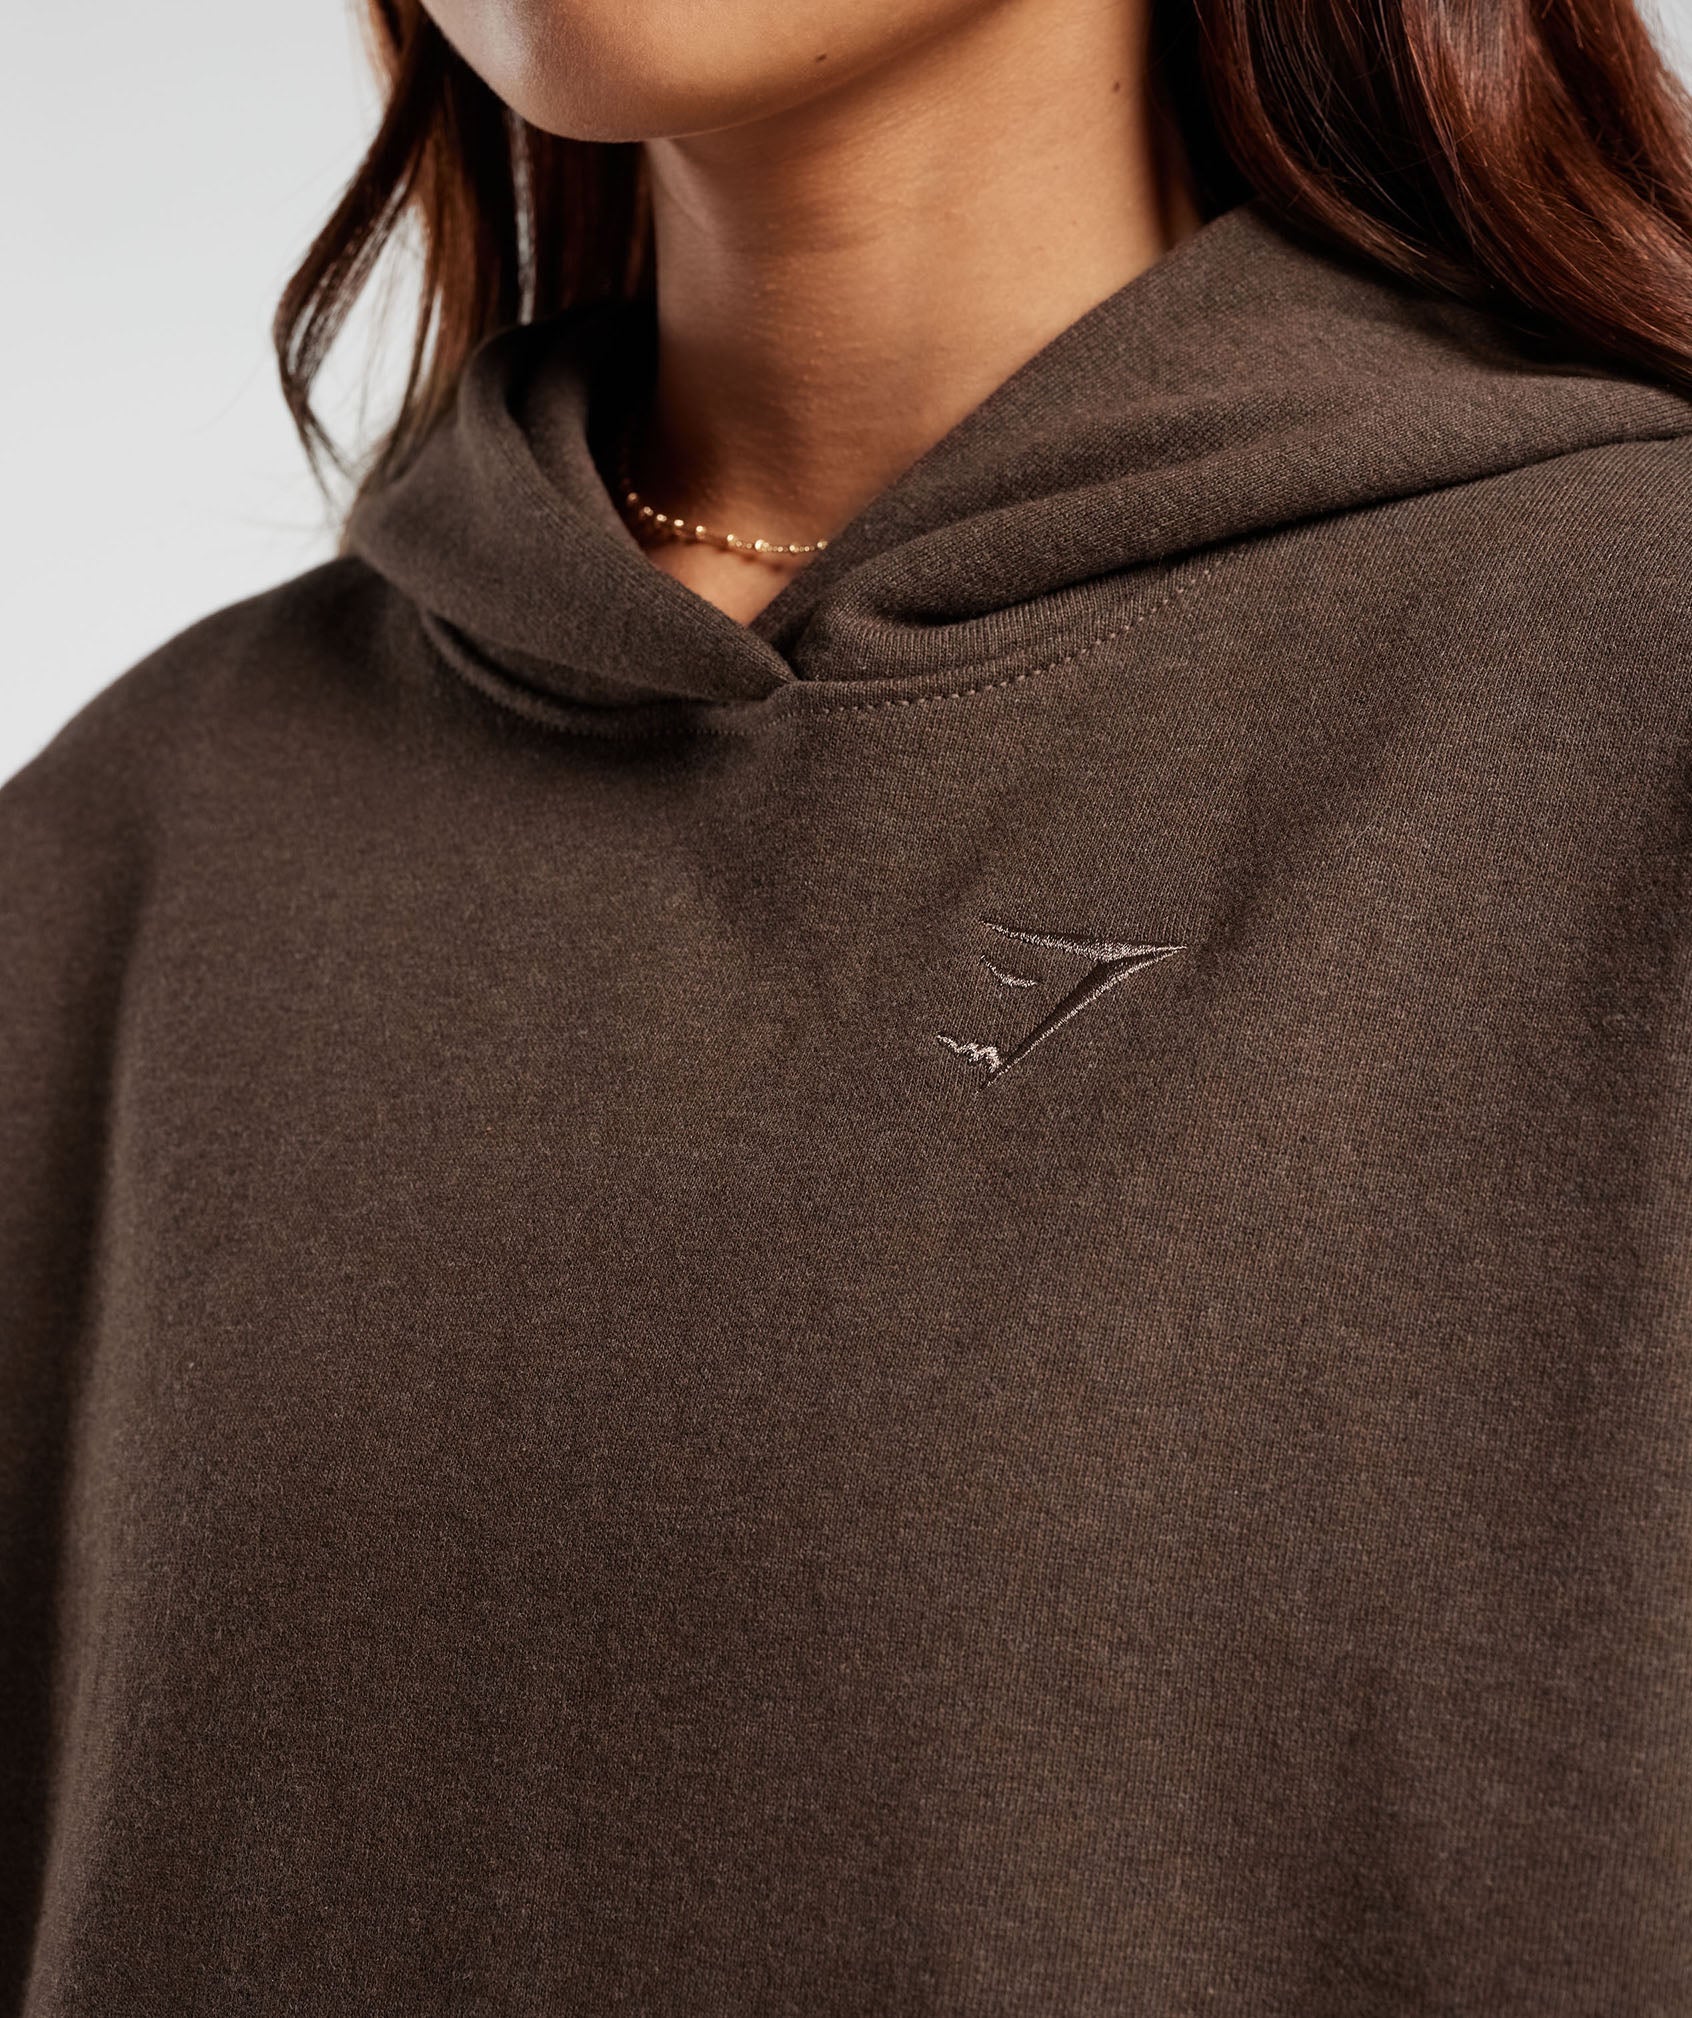 Rest Day Sweats Hoodie in Cozy Brown Marl - view 6